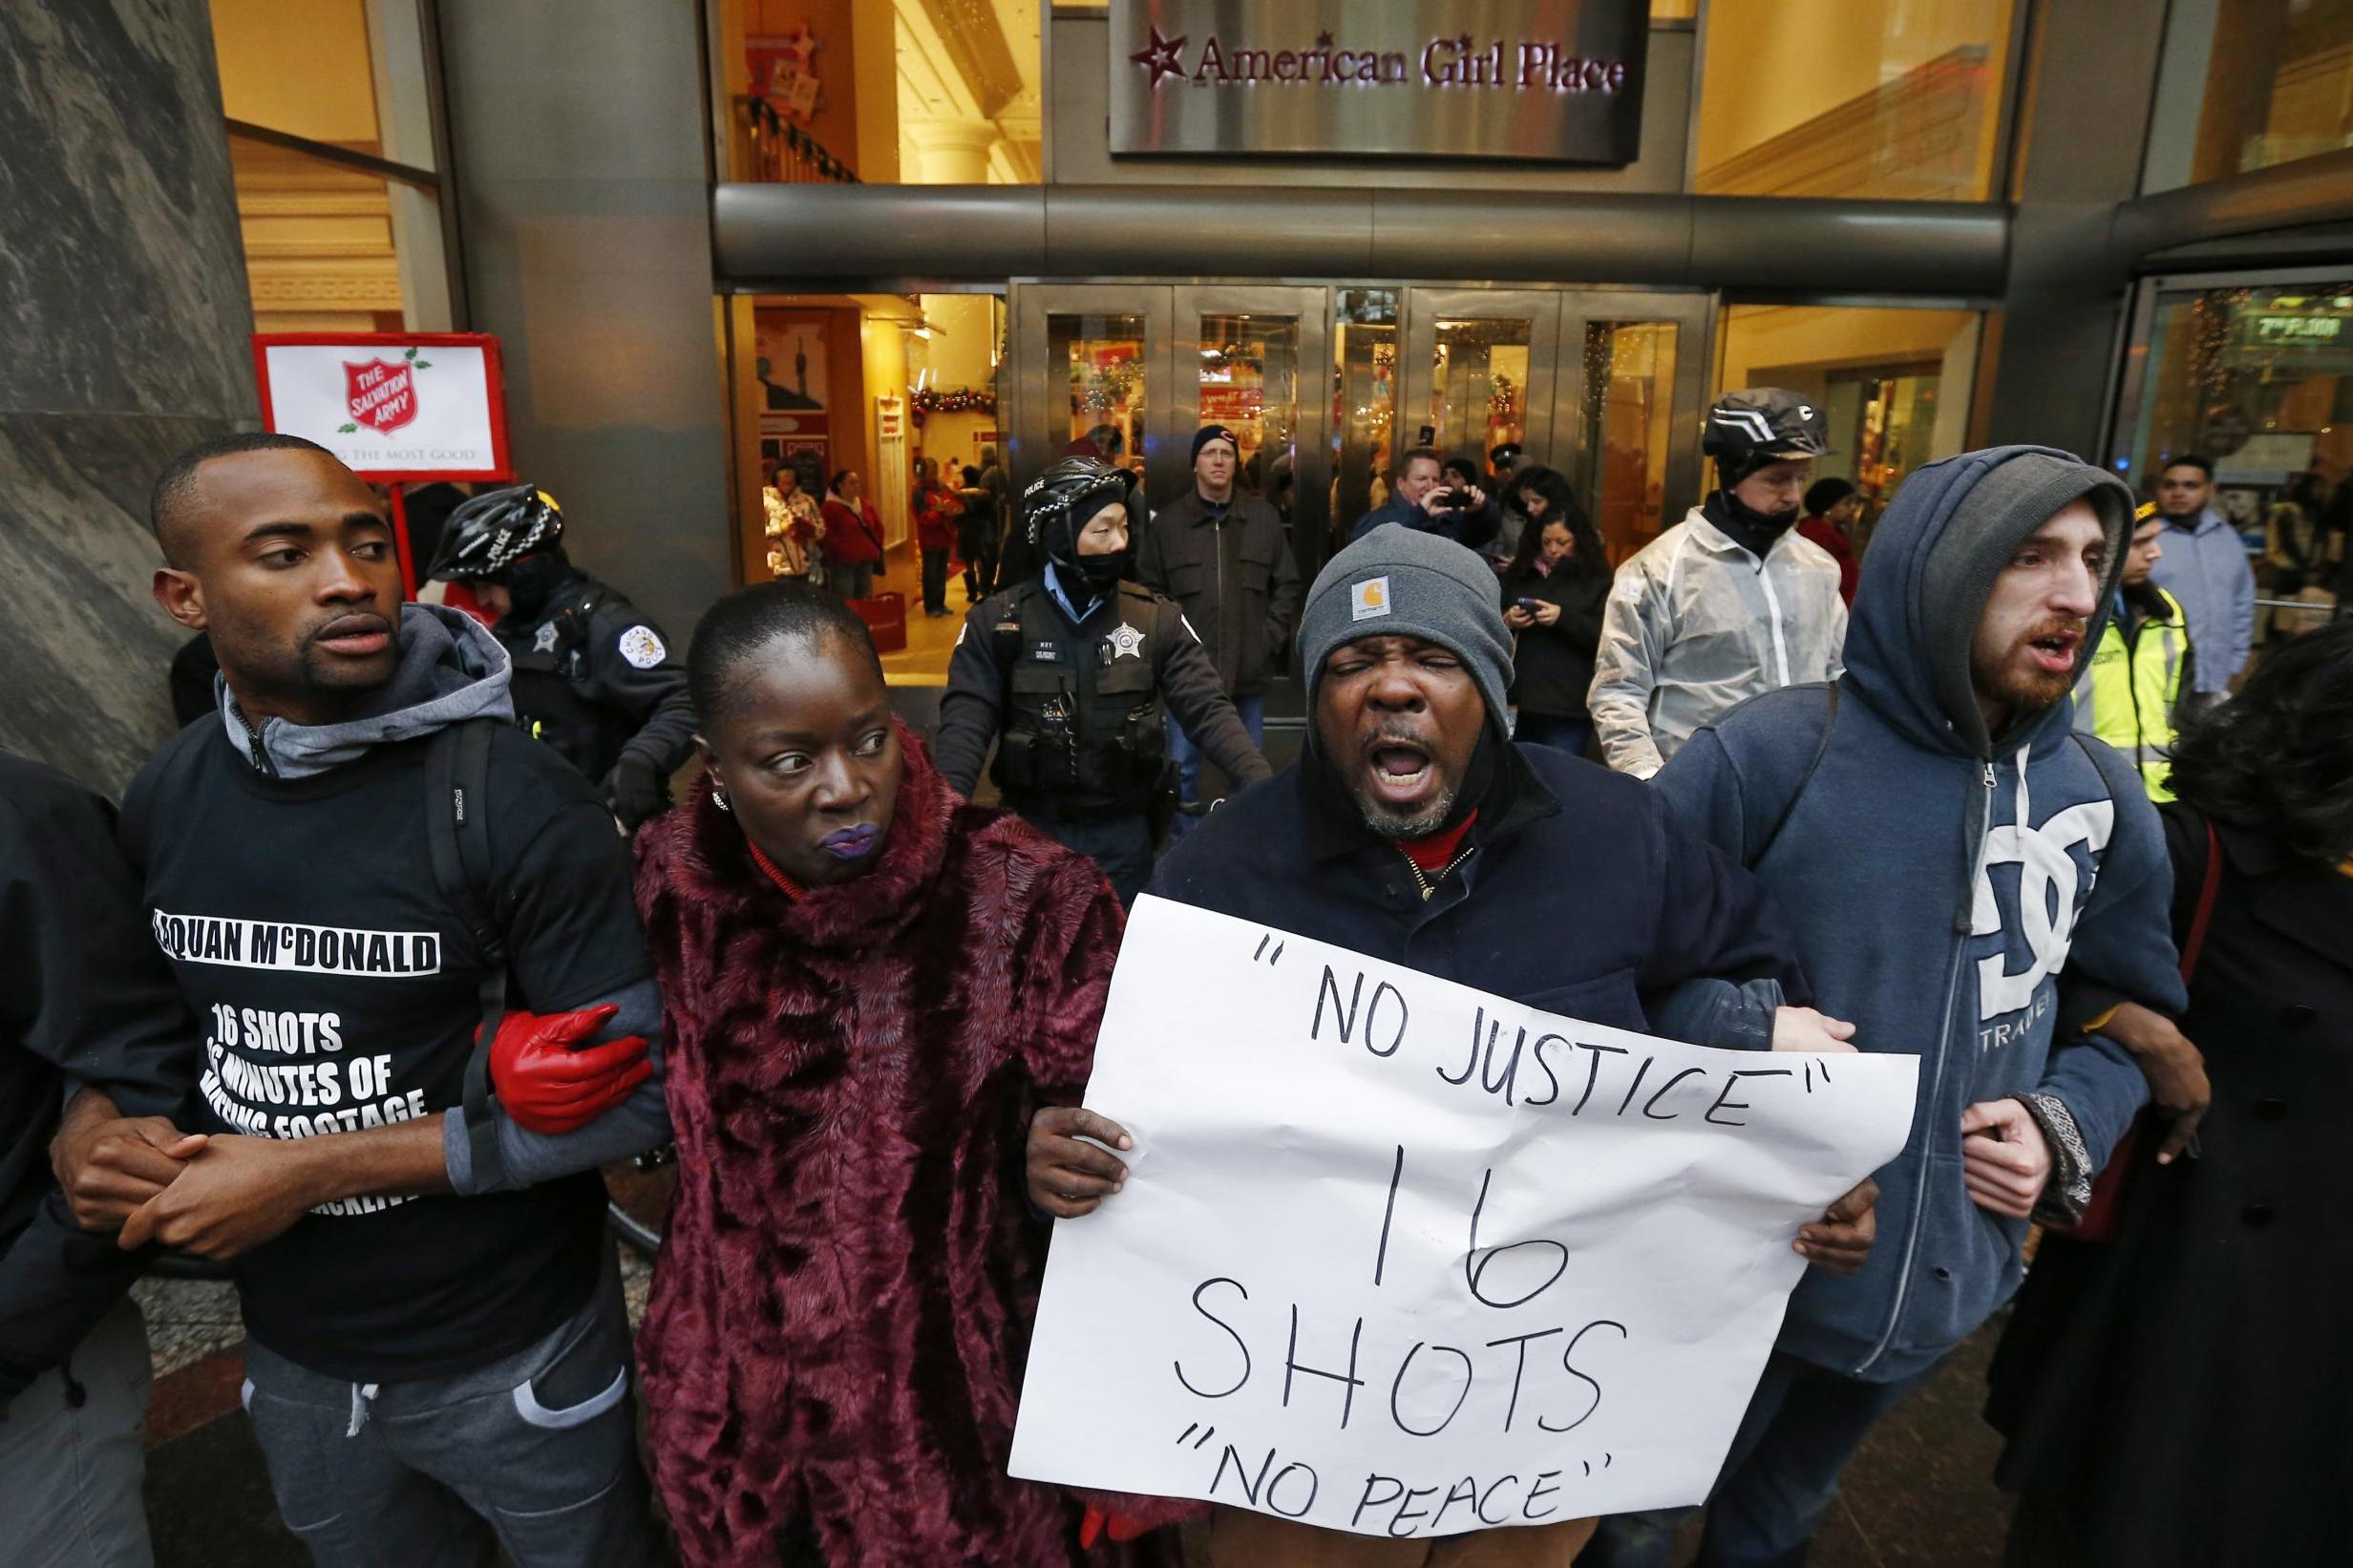 Demonstators link arms in solidarity as they protest the shooting death of black teenager Laquan McDonald by a white policeman and the city’s handling of the case in the downtown shopping district of Chicago, Illinois, 27 November 2015.